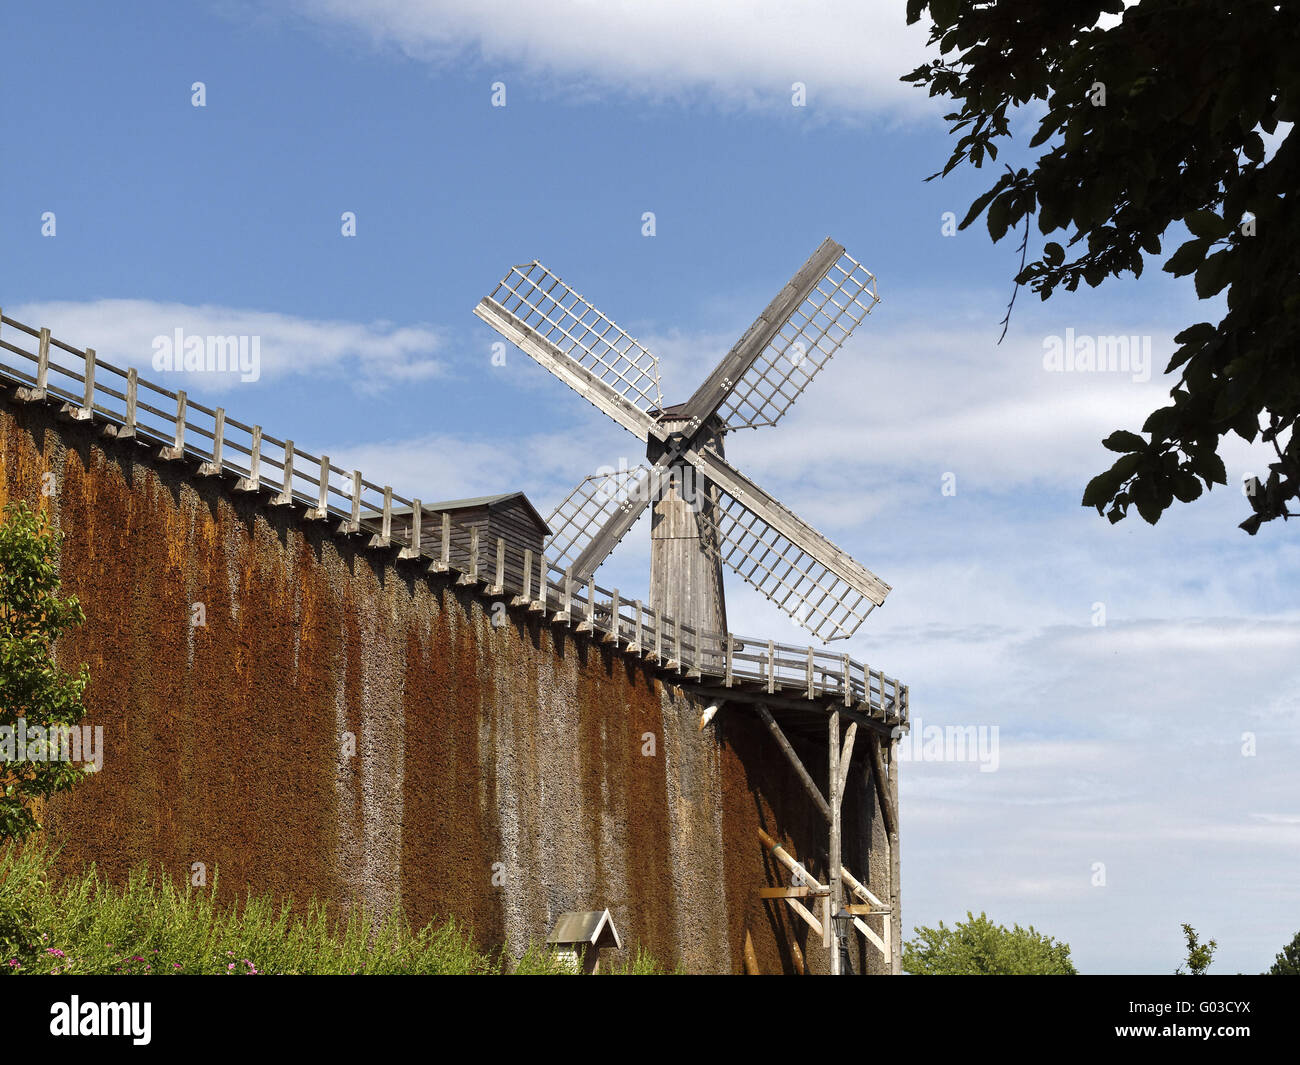 Bad Rothenfelde, salt-works with windmill, Germany Stock Photo